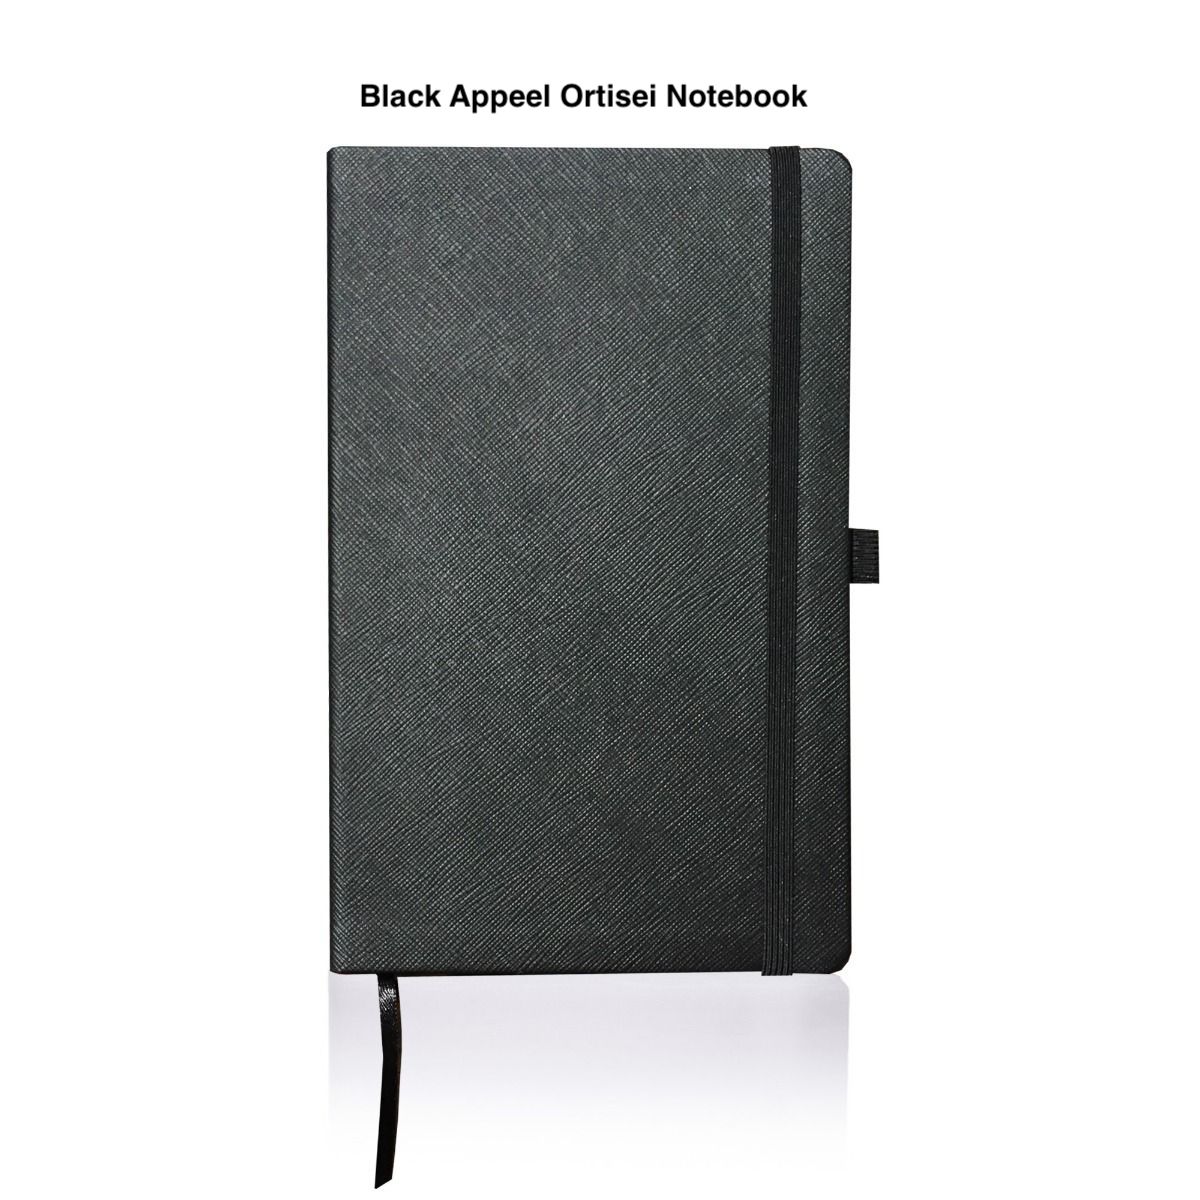 Appeel Medium Notebook with sustainable paper in black.